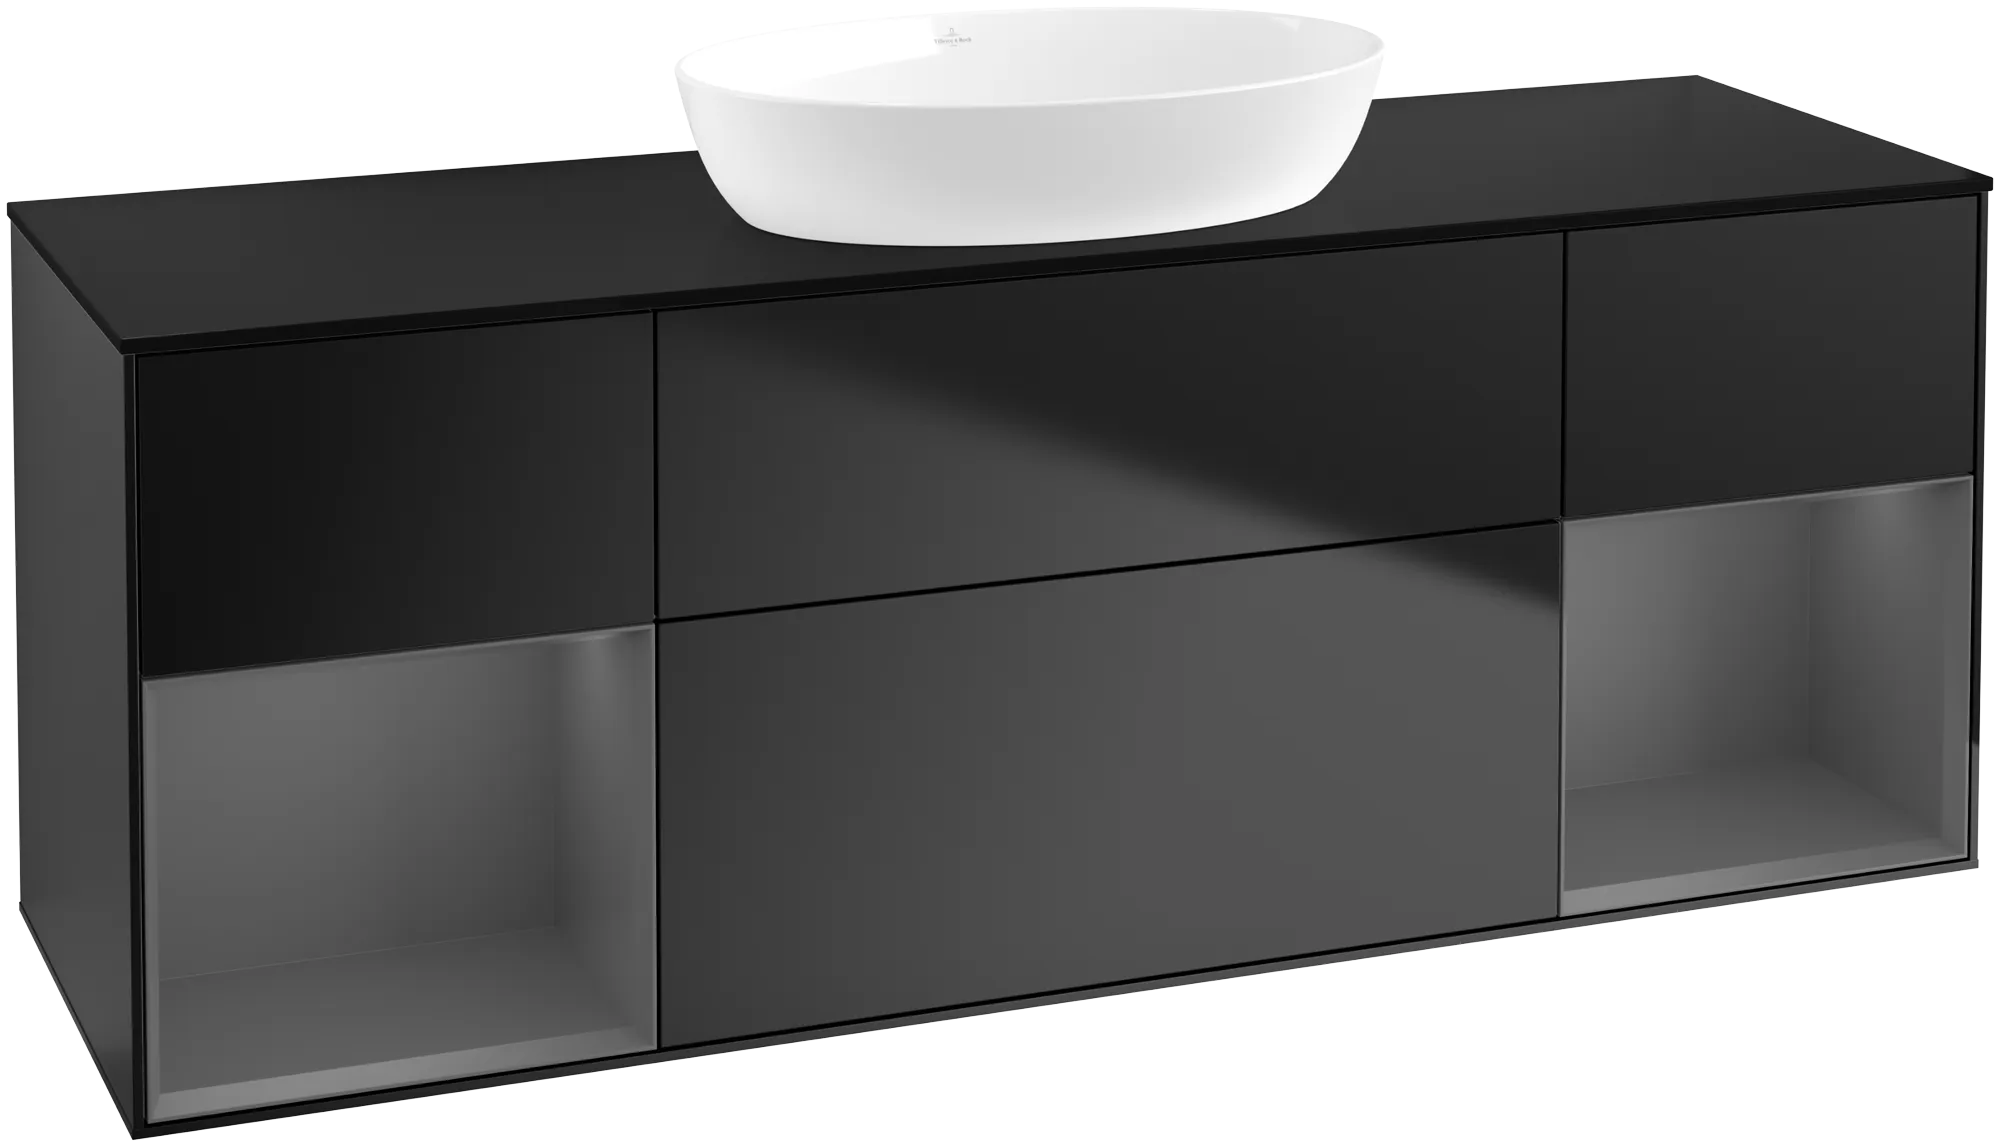 Picture of VILLEROY BOCH Finion Vanity unit, with lighting, 4 pull-out compartments, 1600 x 603 x 501 mm, Black Matt Lacquer / Anthracite Matt Lacquer / Glass Black Matt #GD02GKPD